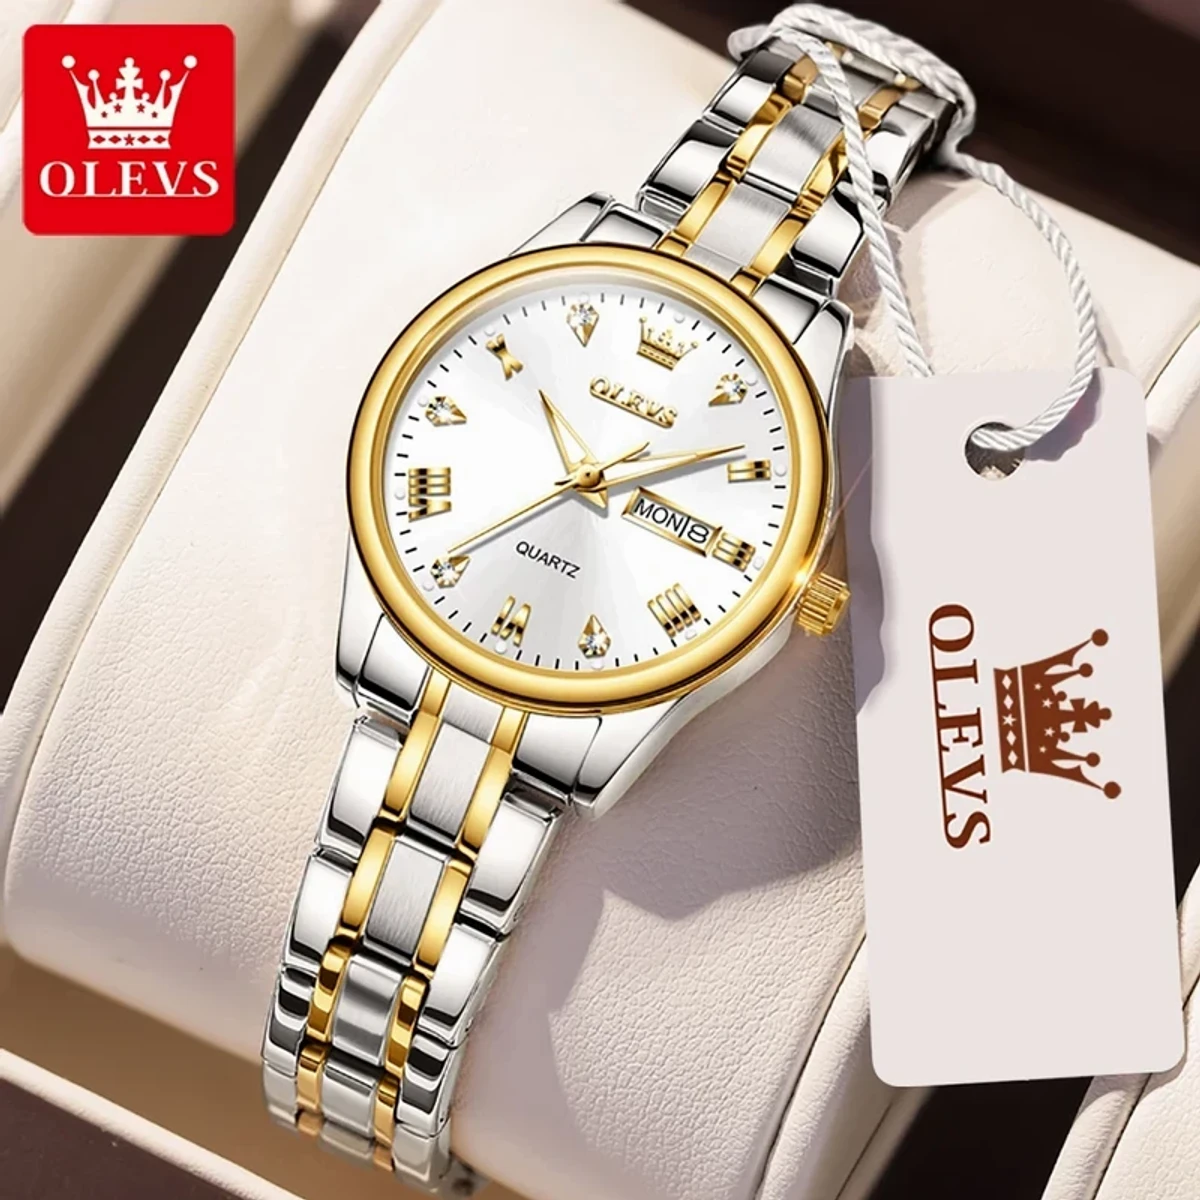 COMBO   WATCH OLEVS MODEL 5563 TOP BRAND LB01 OLEVS WATCH COMBO TOTON AR DIAL  WHITE 2PS WATCH